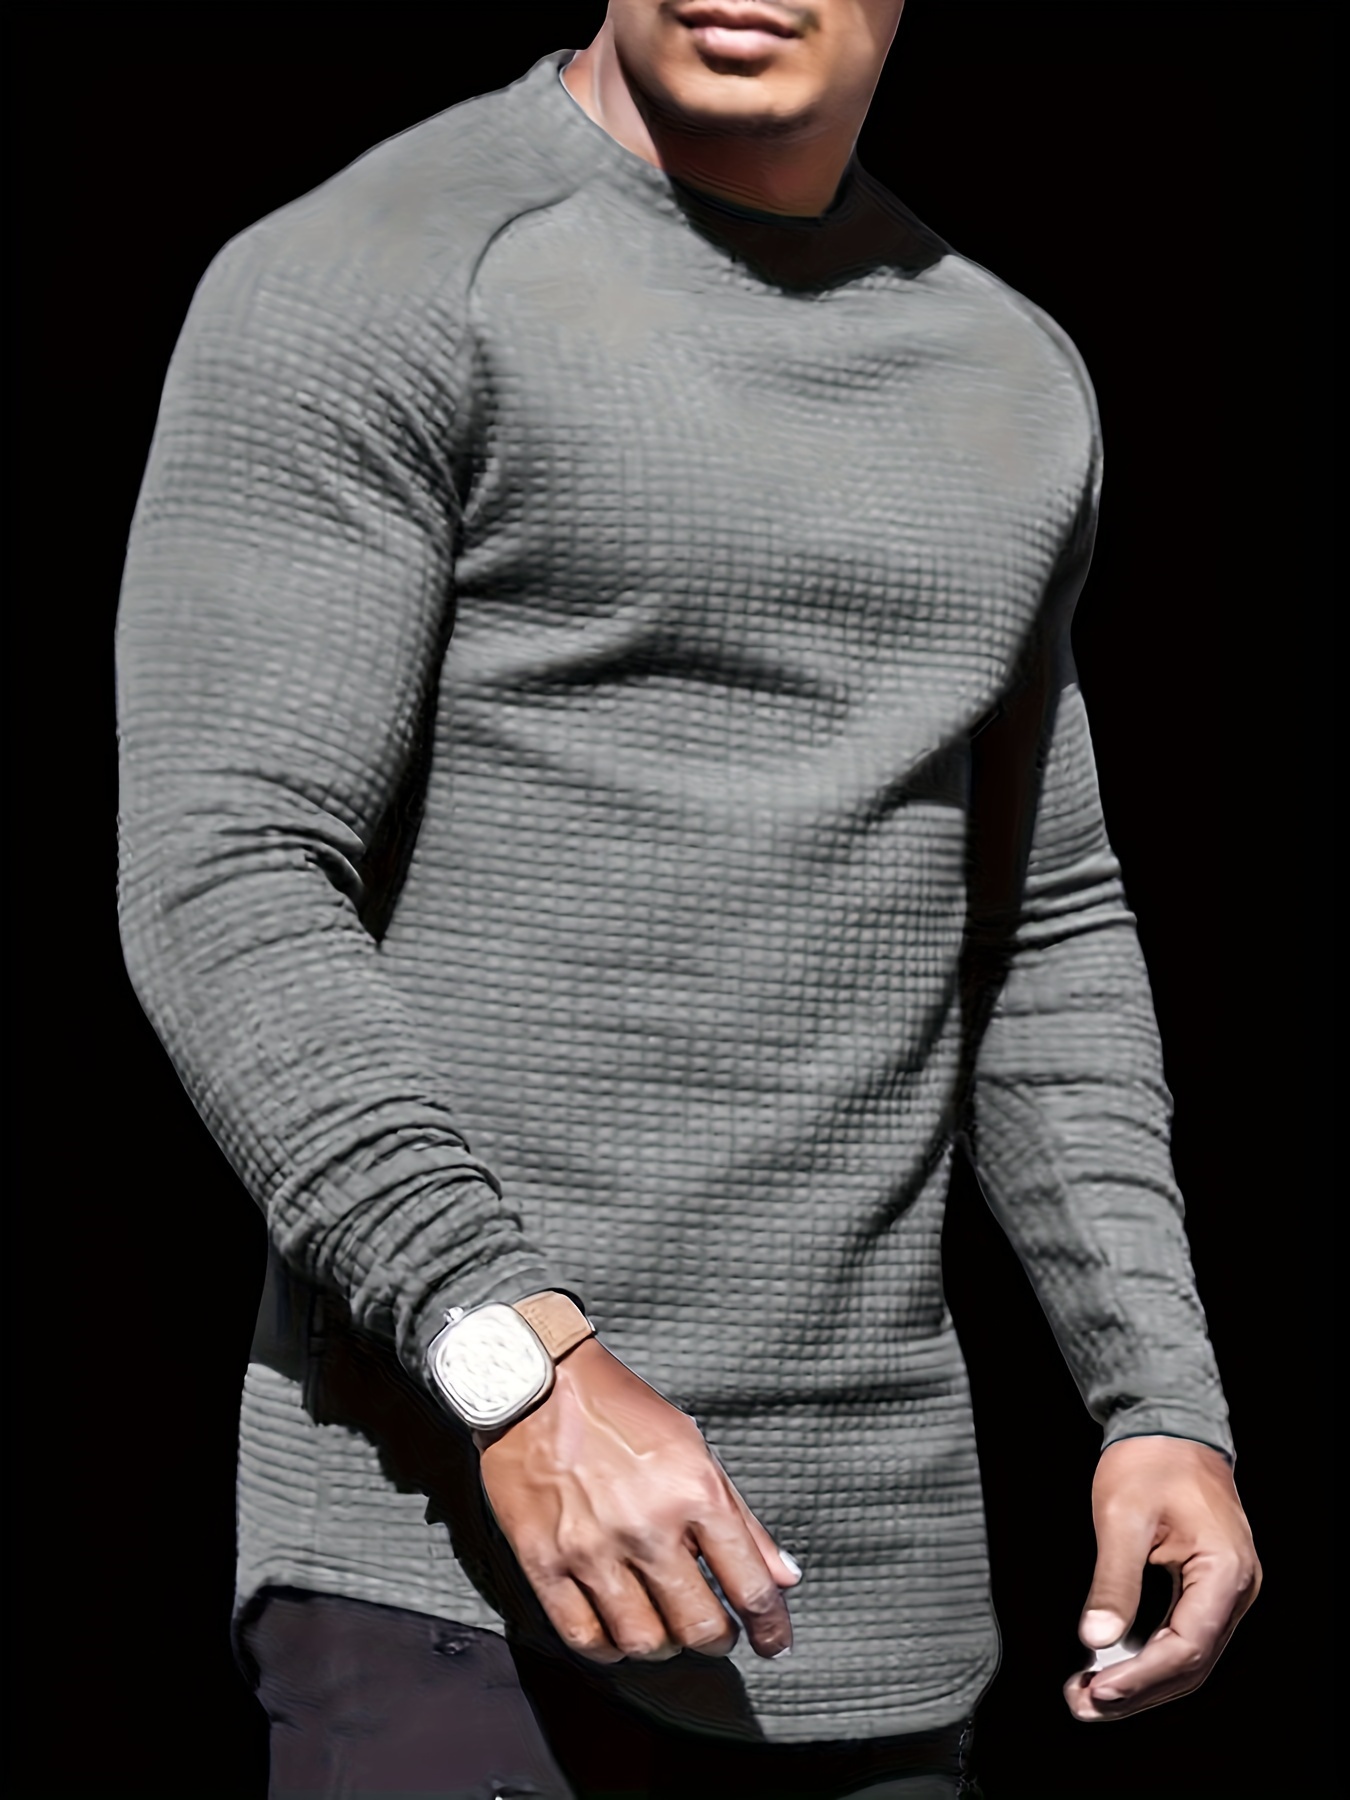 Solid Compression Shirts Men Long Sleeve Athletic Moisture Wicking  Baselayer Undershirt Gear Tshirt For Sports Workout